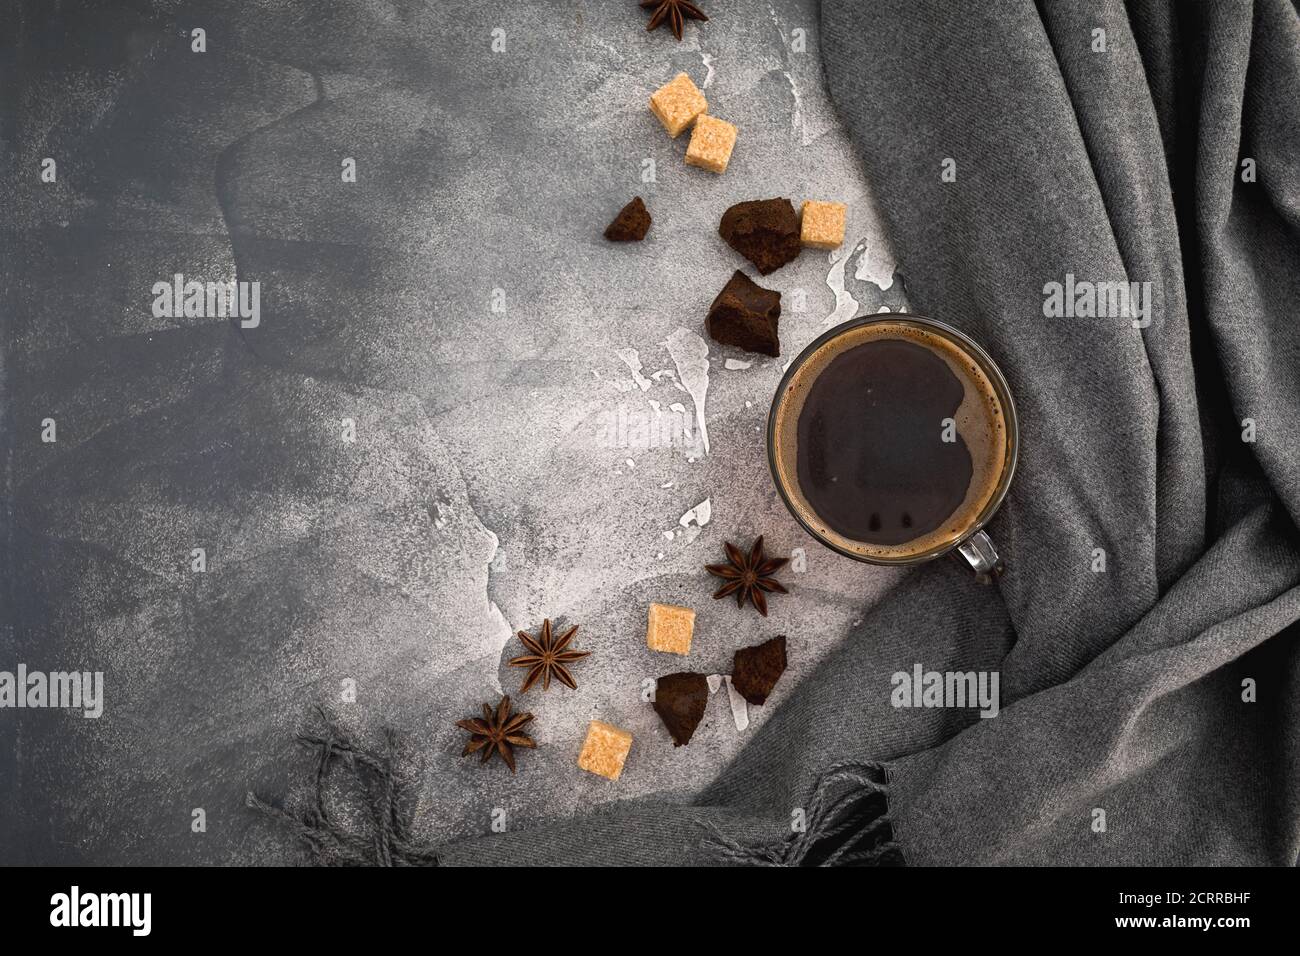 Composition with coffee cup, sugar and dark chocolate on gray background. Flat lay, top view Stock Photo